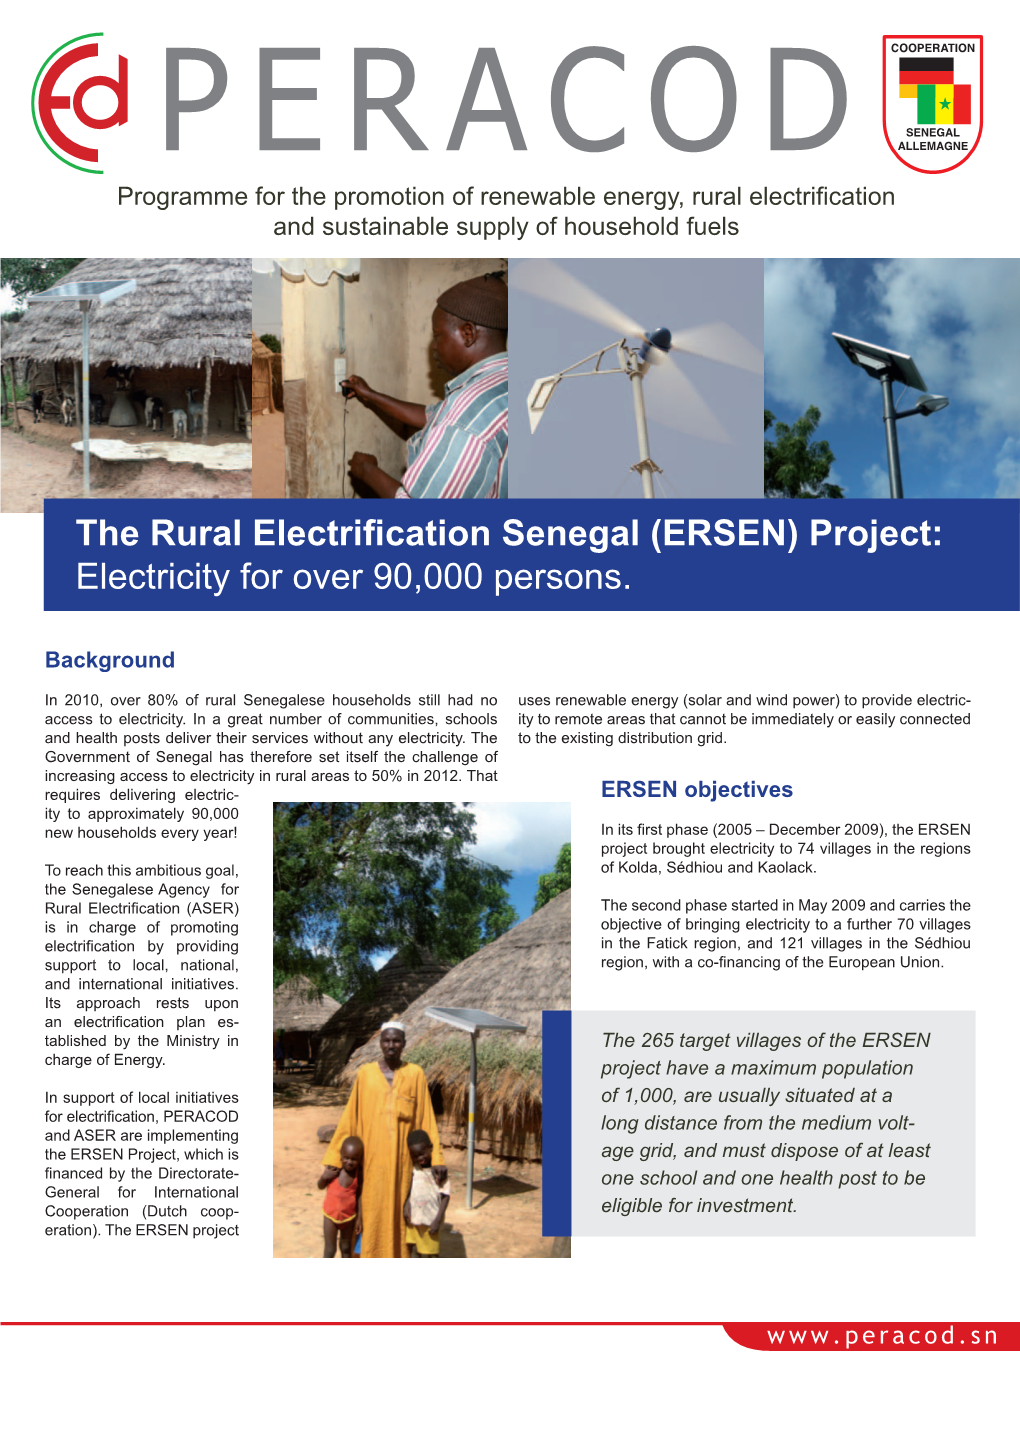 The Rural Electrification Senegal (ERSEN) Project: Electricity for Over 90,000 Persons